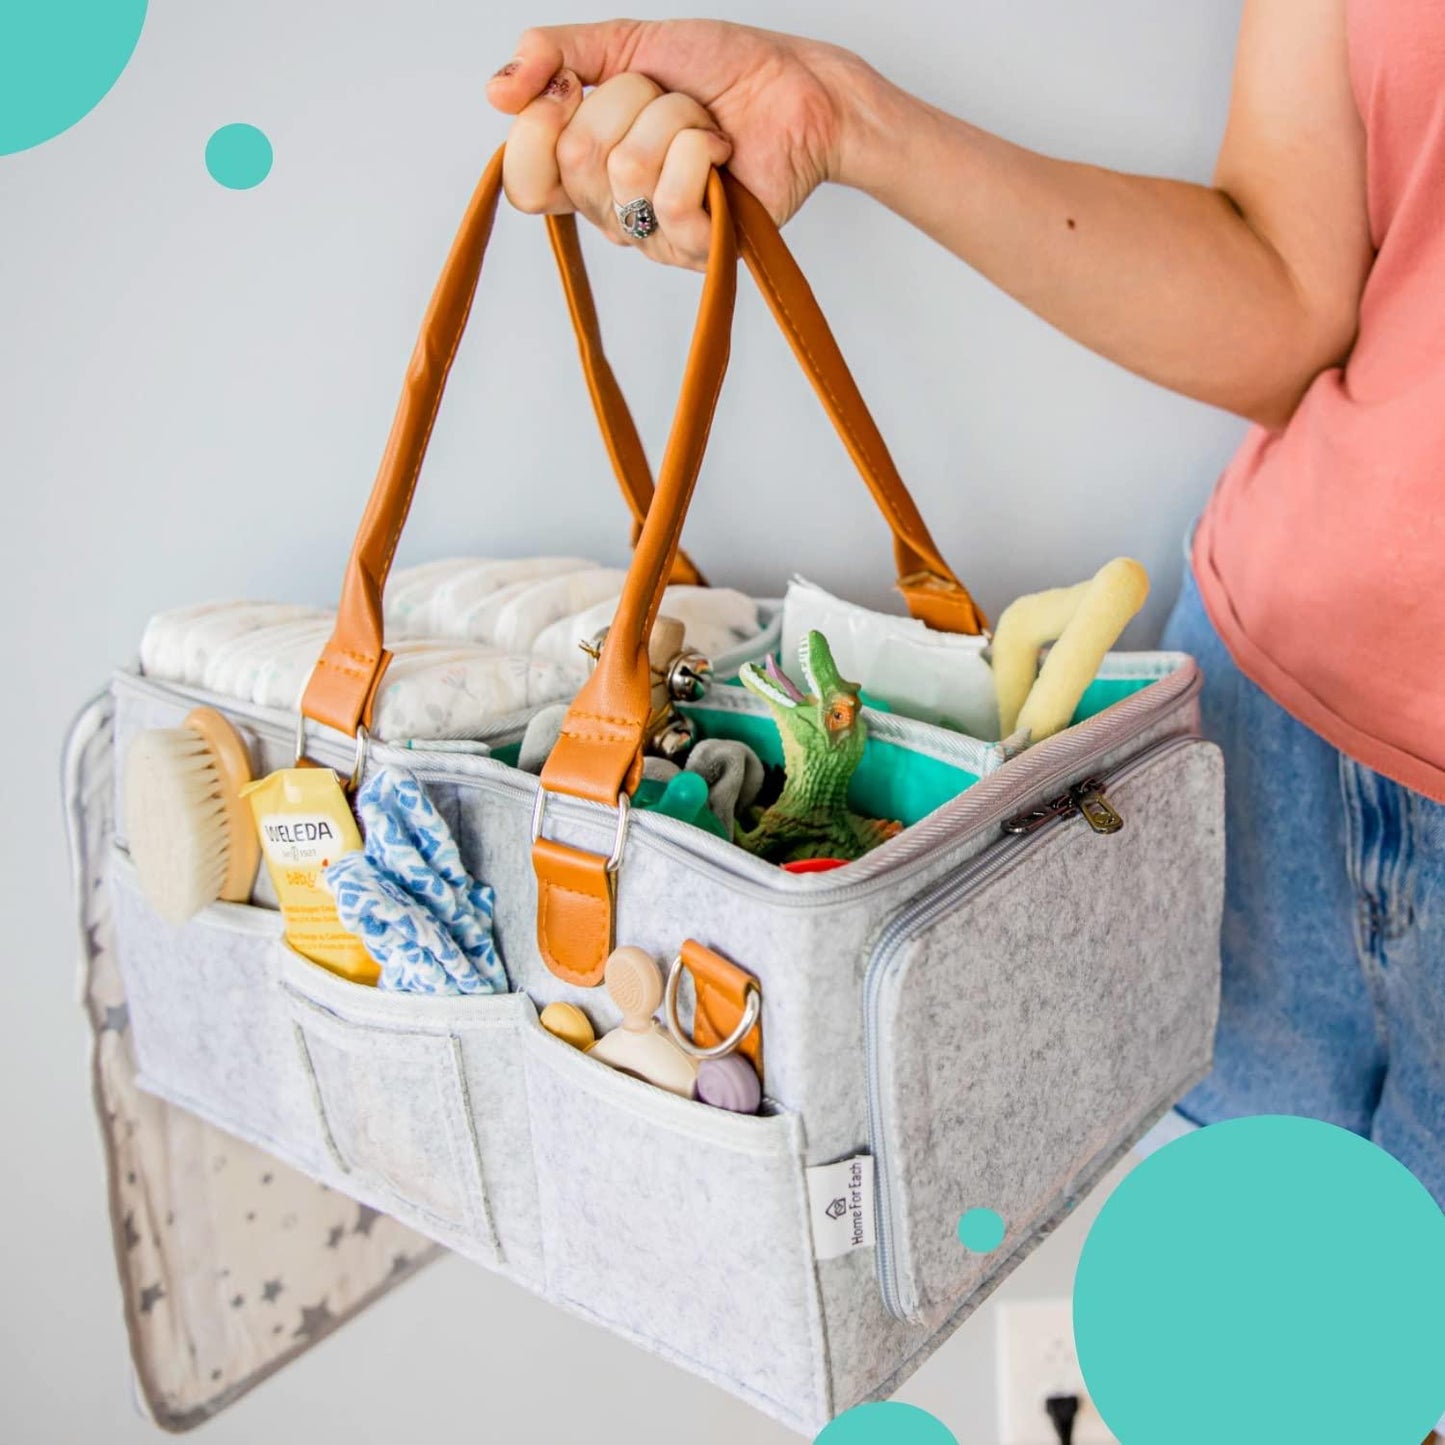 Portable Diaper Caddy Storage Bag with Roll Lid and Removable Dividers, Caddy Organizer for Nursery, Changing Table, Car and More, Travel-Friendly Baby Caddy for Infant Essentials Grey